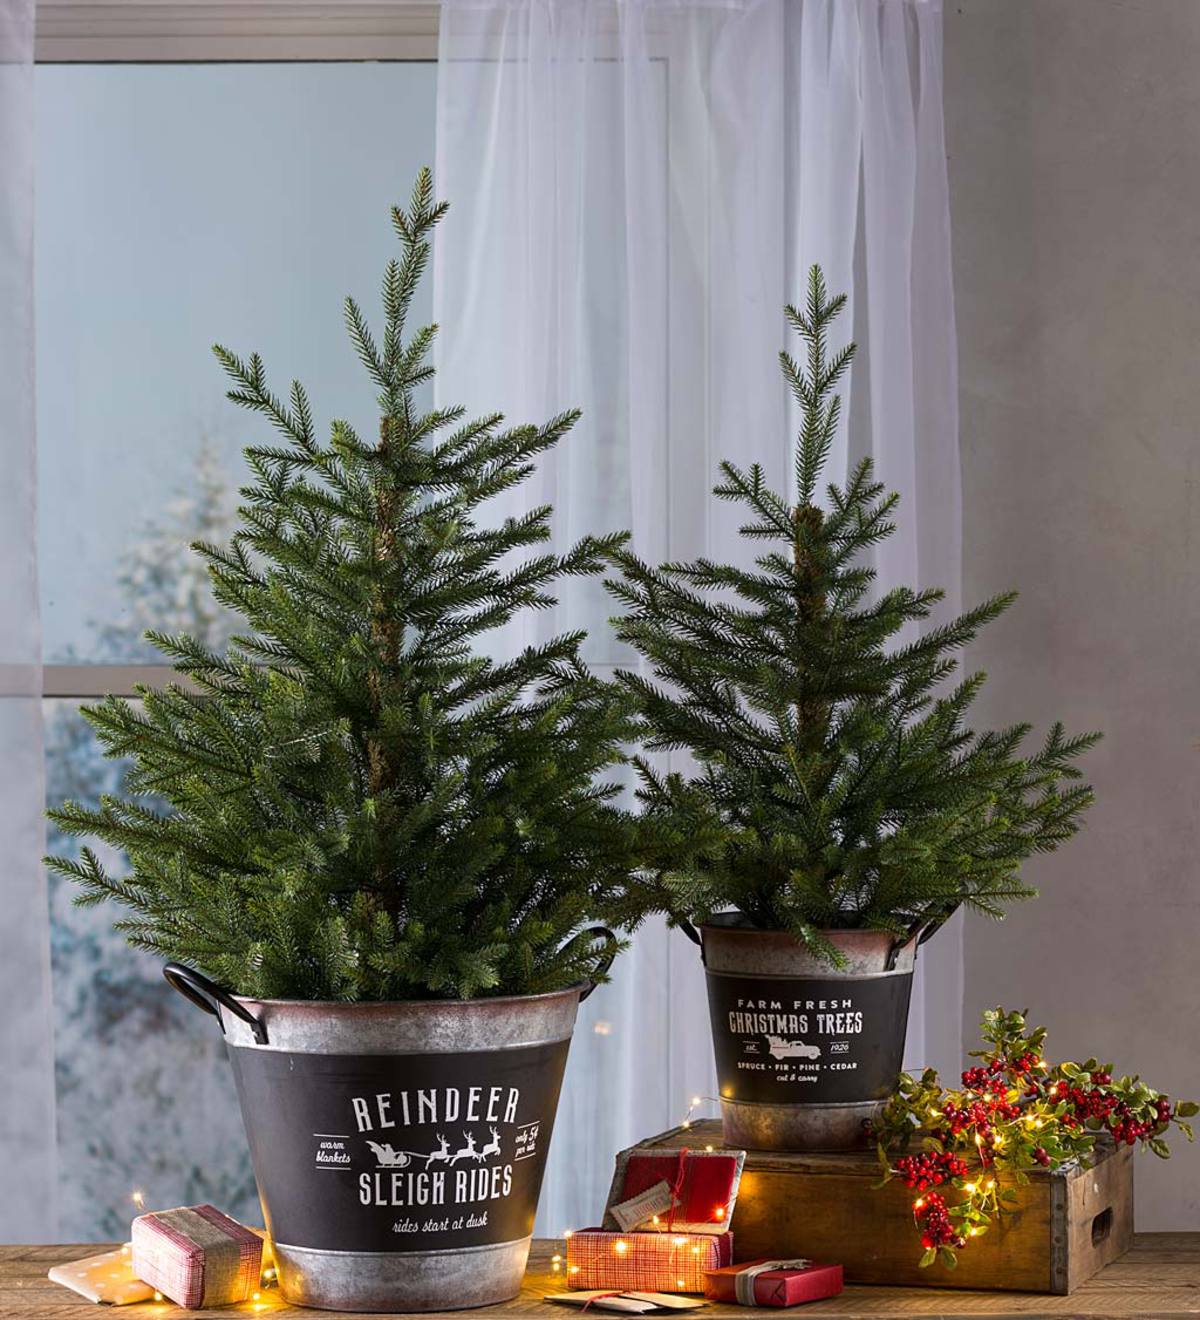 Large Holiday Galvanized Bucket with Chalkboard Design